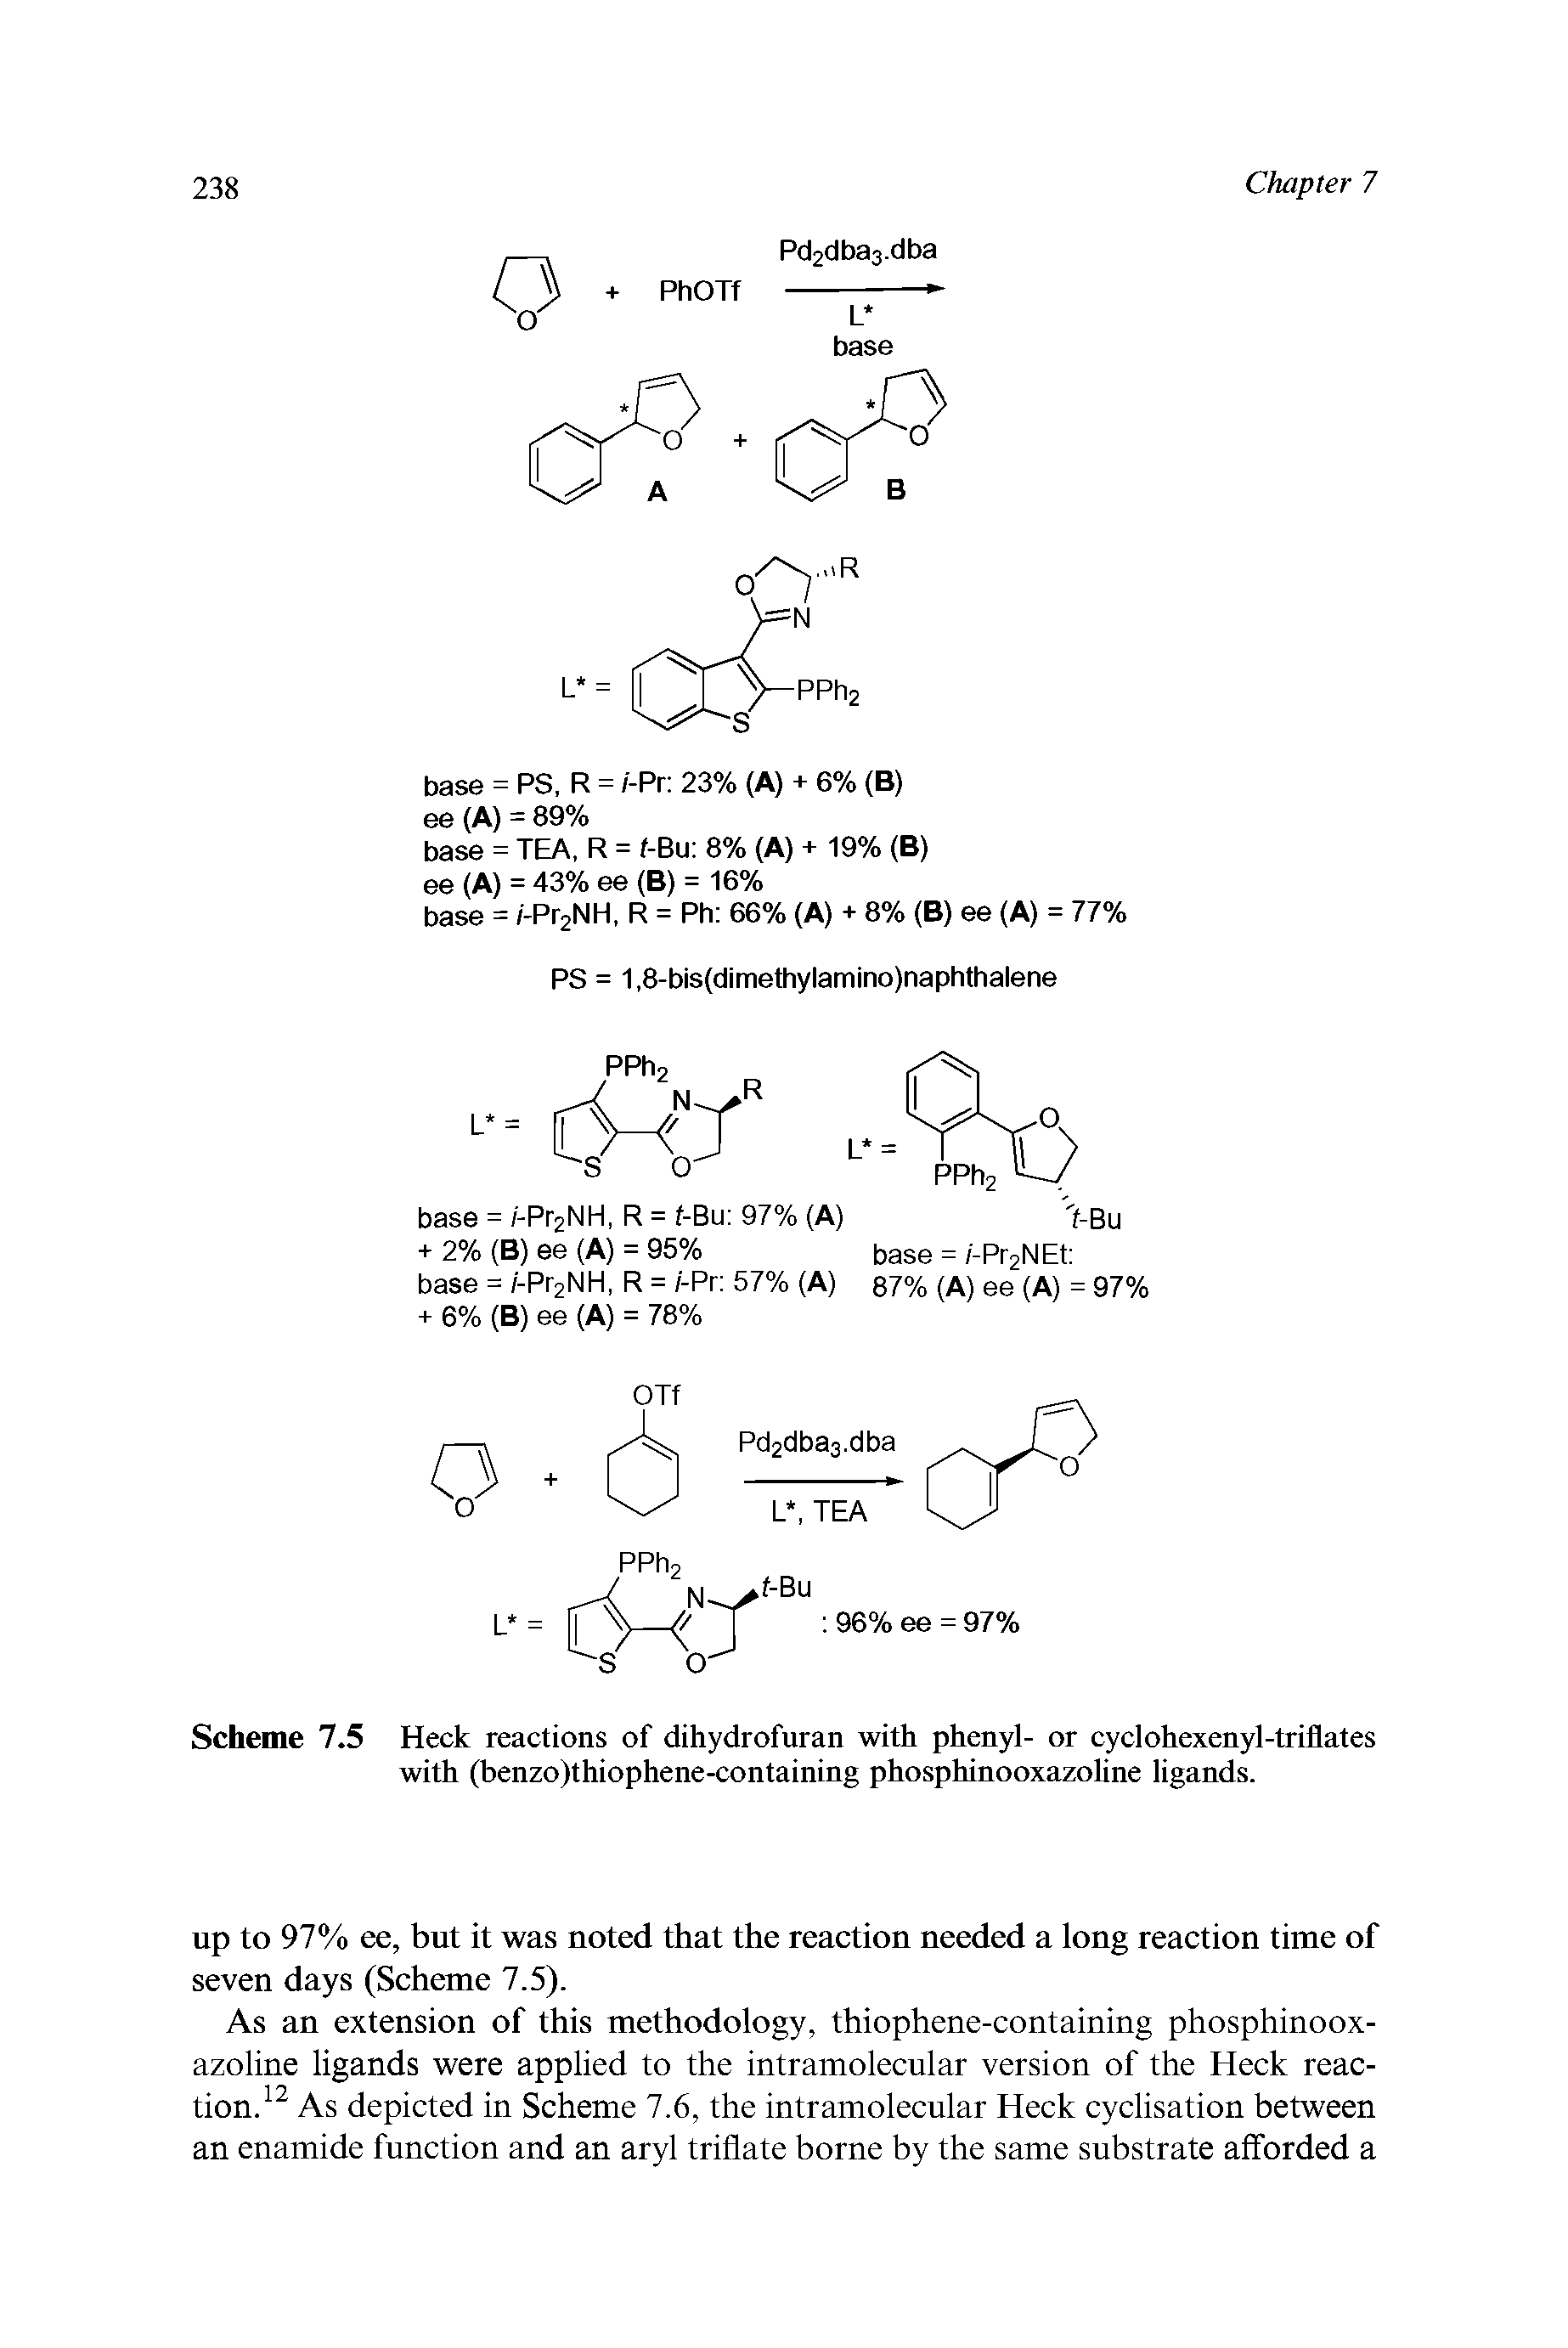 Scheme 7.5 Heck reactions of dihydrofuran with phenyl- or cyclohexenyl-triflates with (benzo)thiophene-containing phosphinooxazoline ligands.